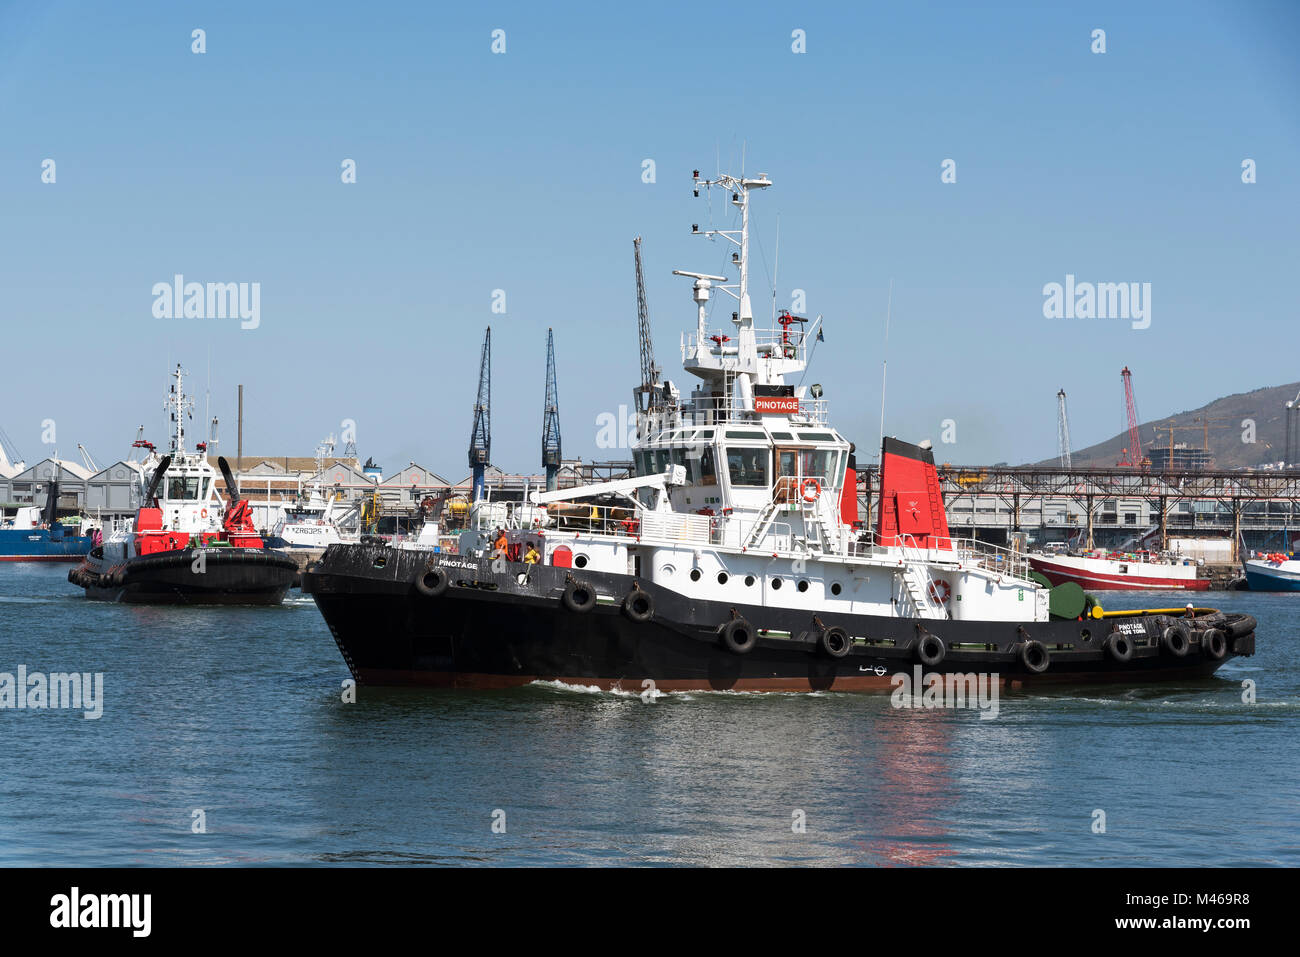 Two ocean going tugs, Pinotage and Usiba underway on Cape Town harbour South Africa. December 2017 Stock Photo